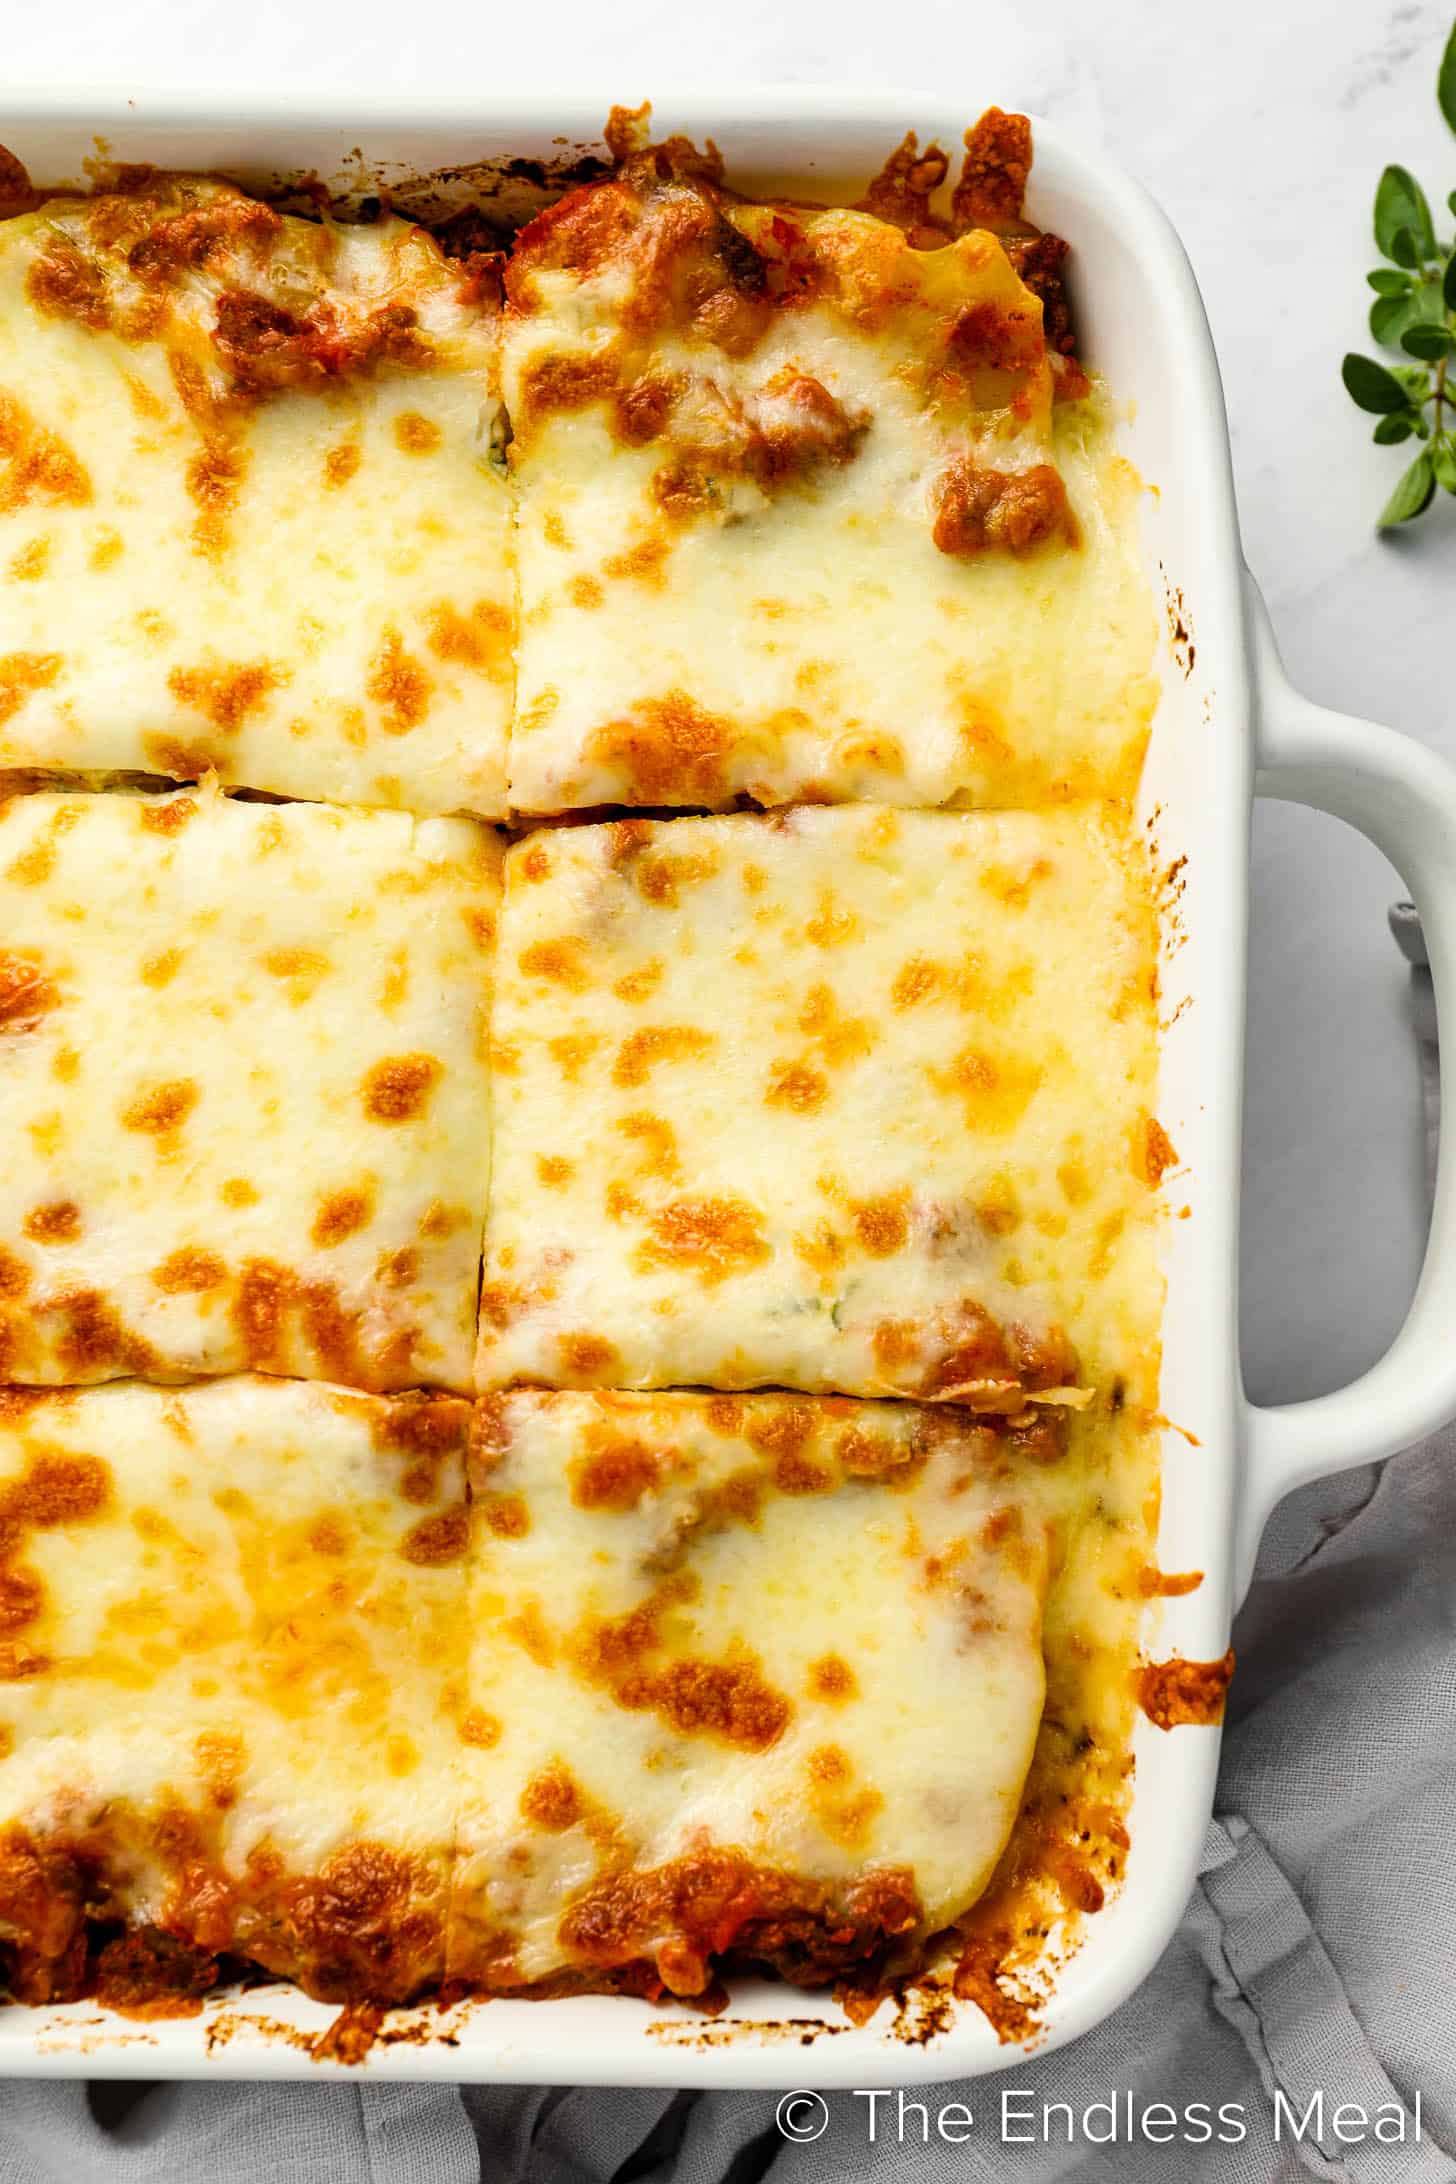 Our Easy Lasagna Recipe hot out of the oven